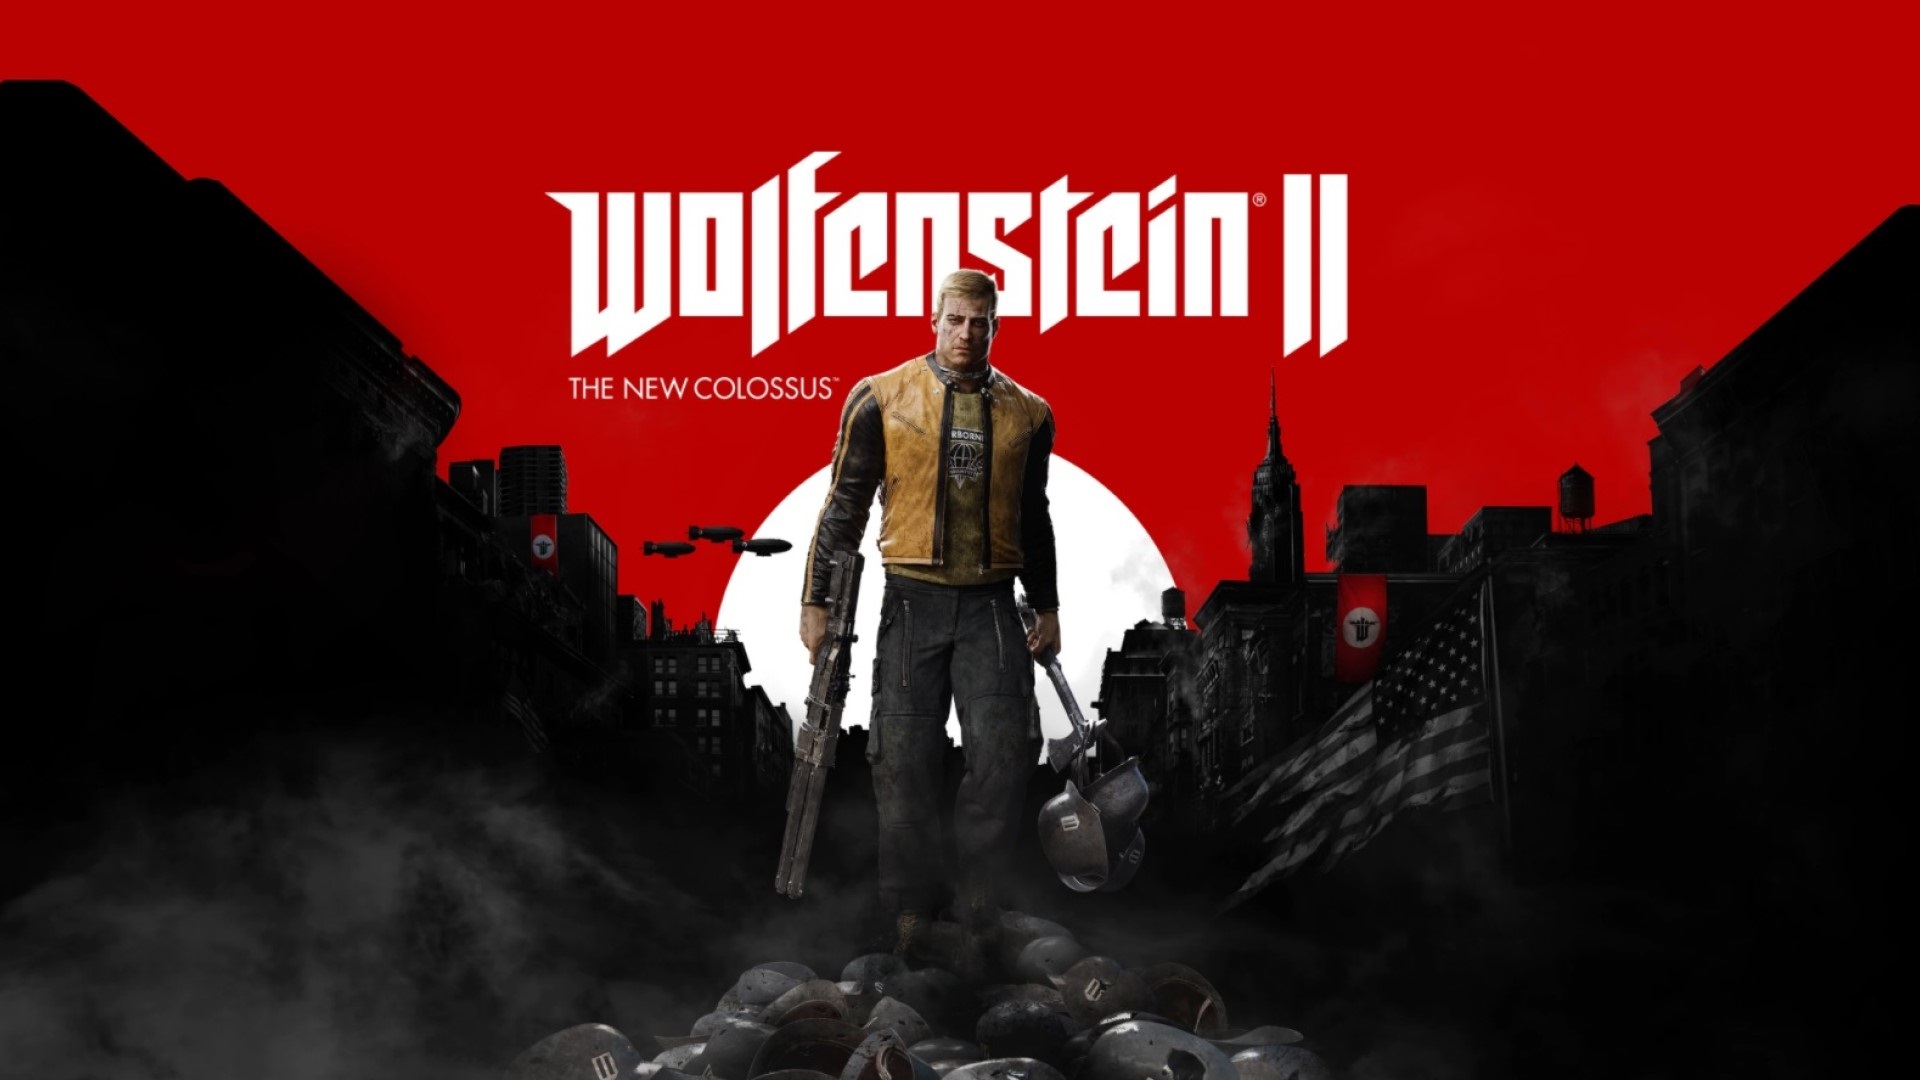 Wolfenstein 2: the New Colossus] #198 Finally managed to finish